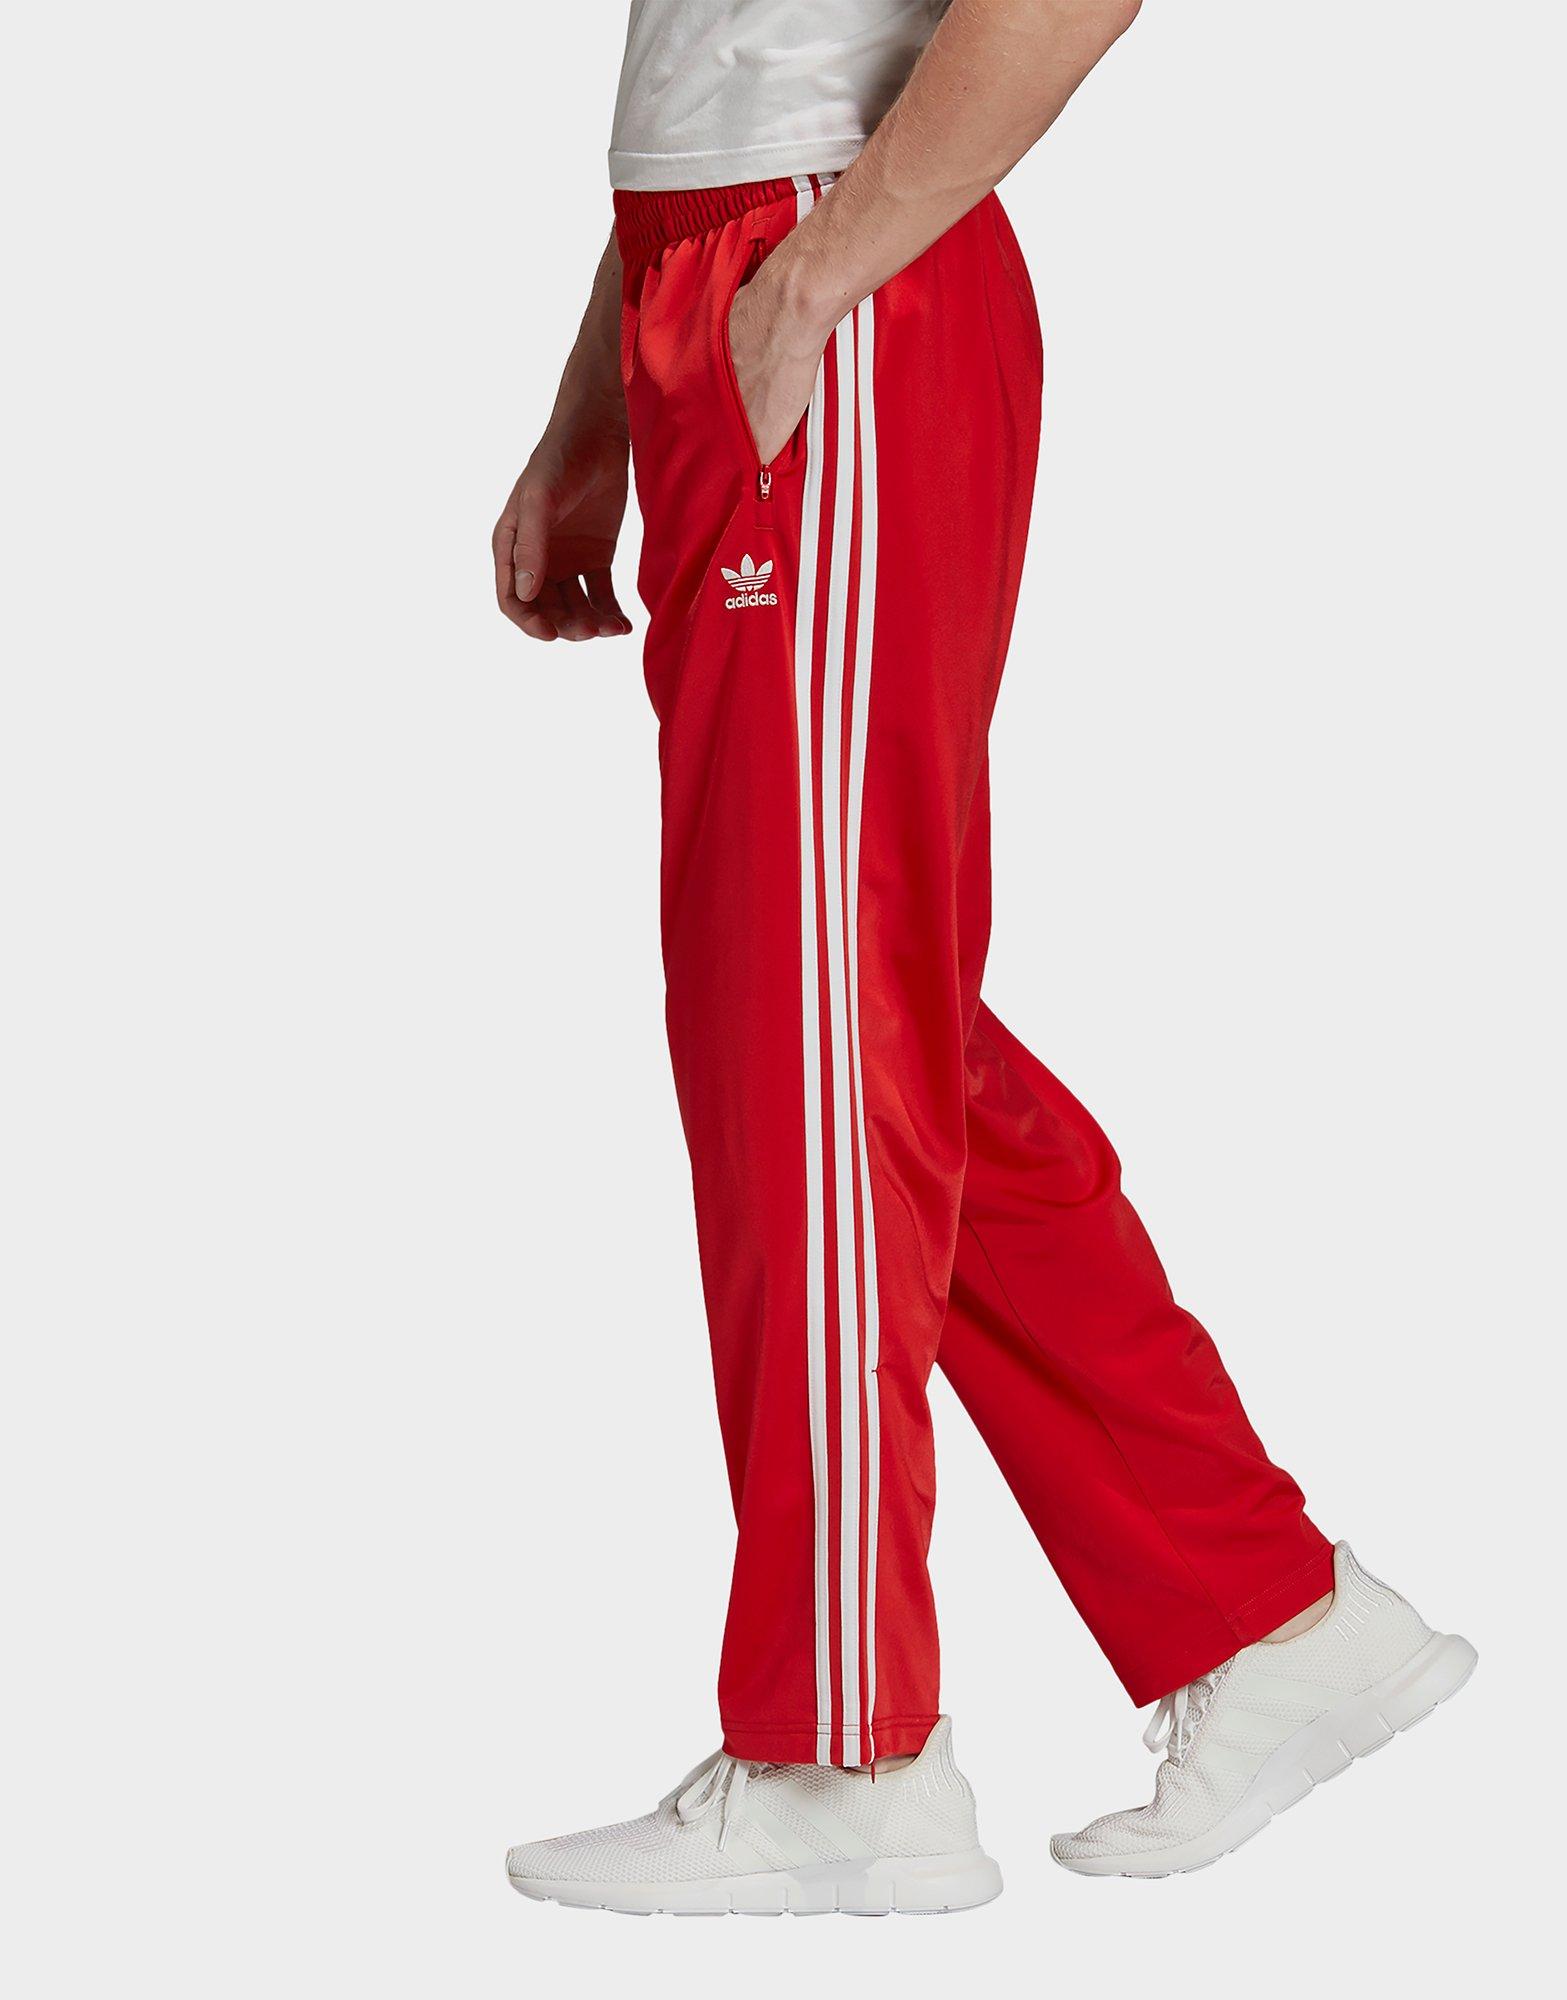 red tracksuit pants